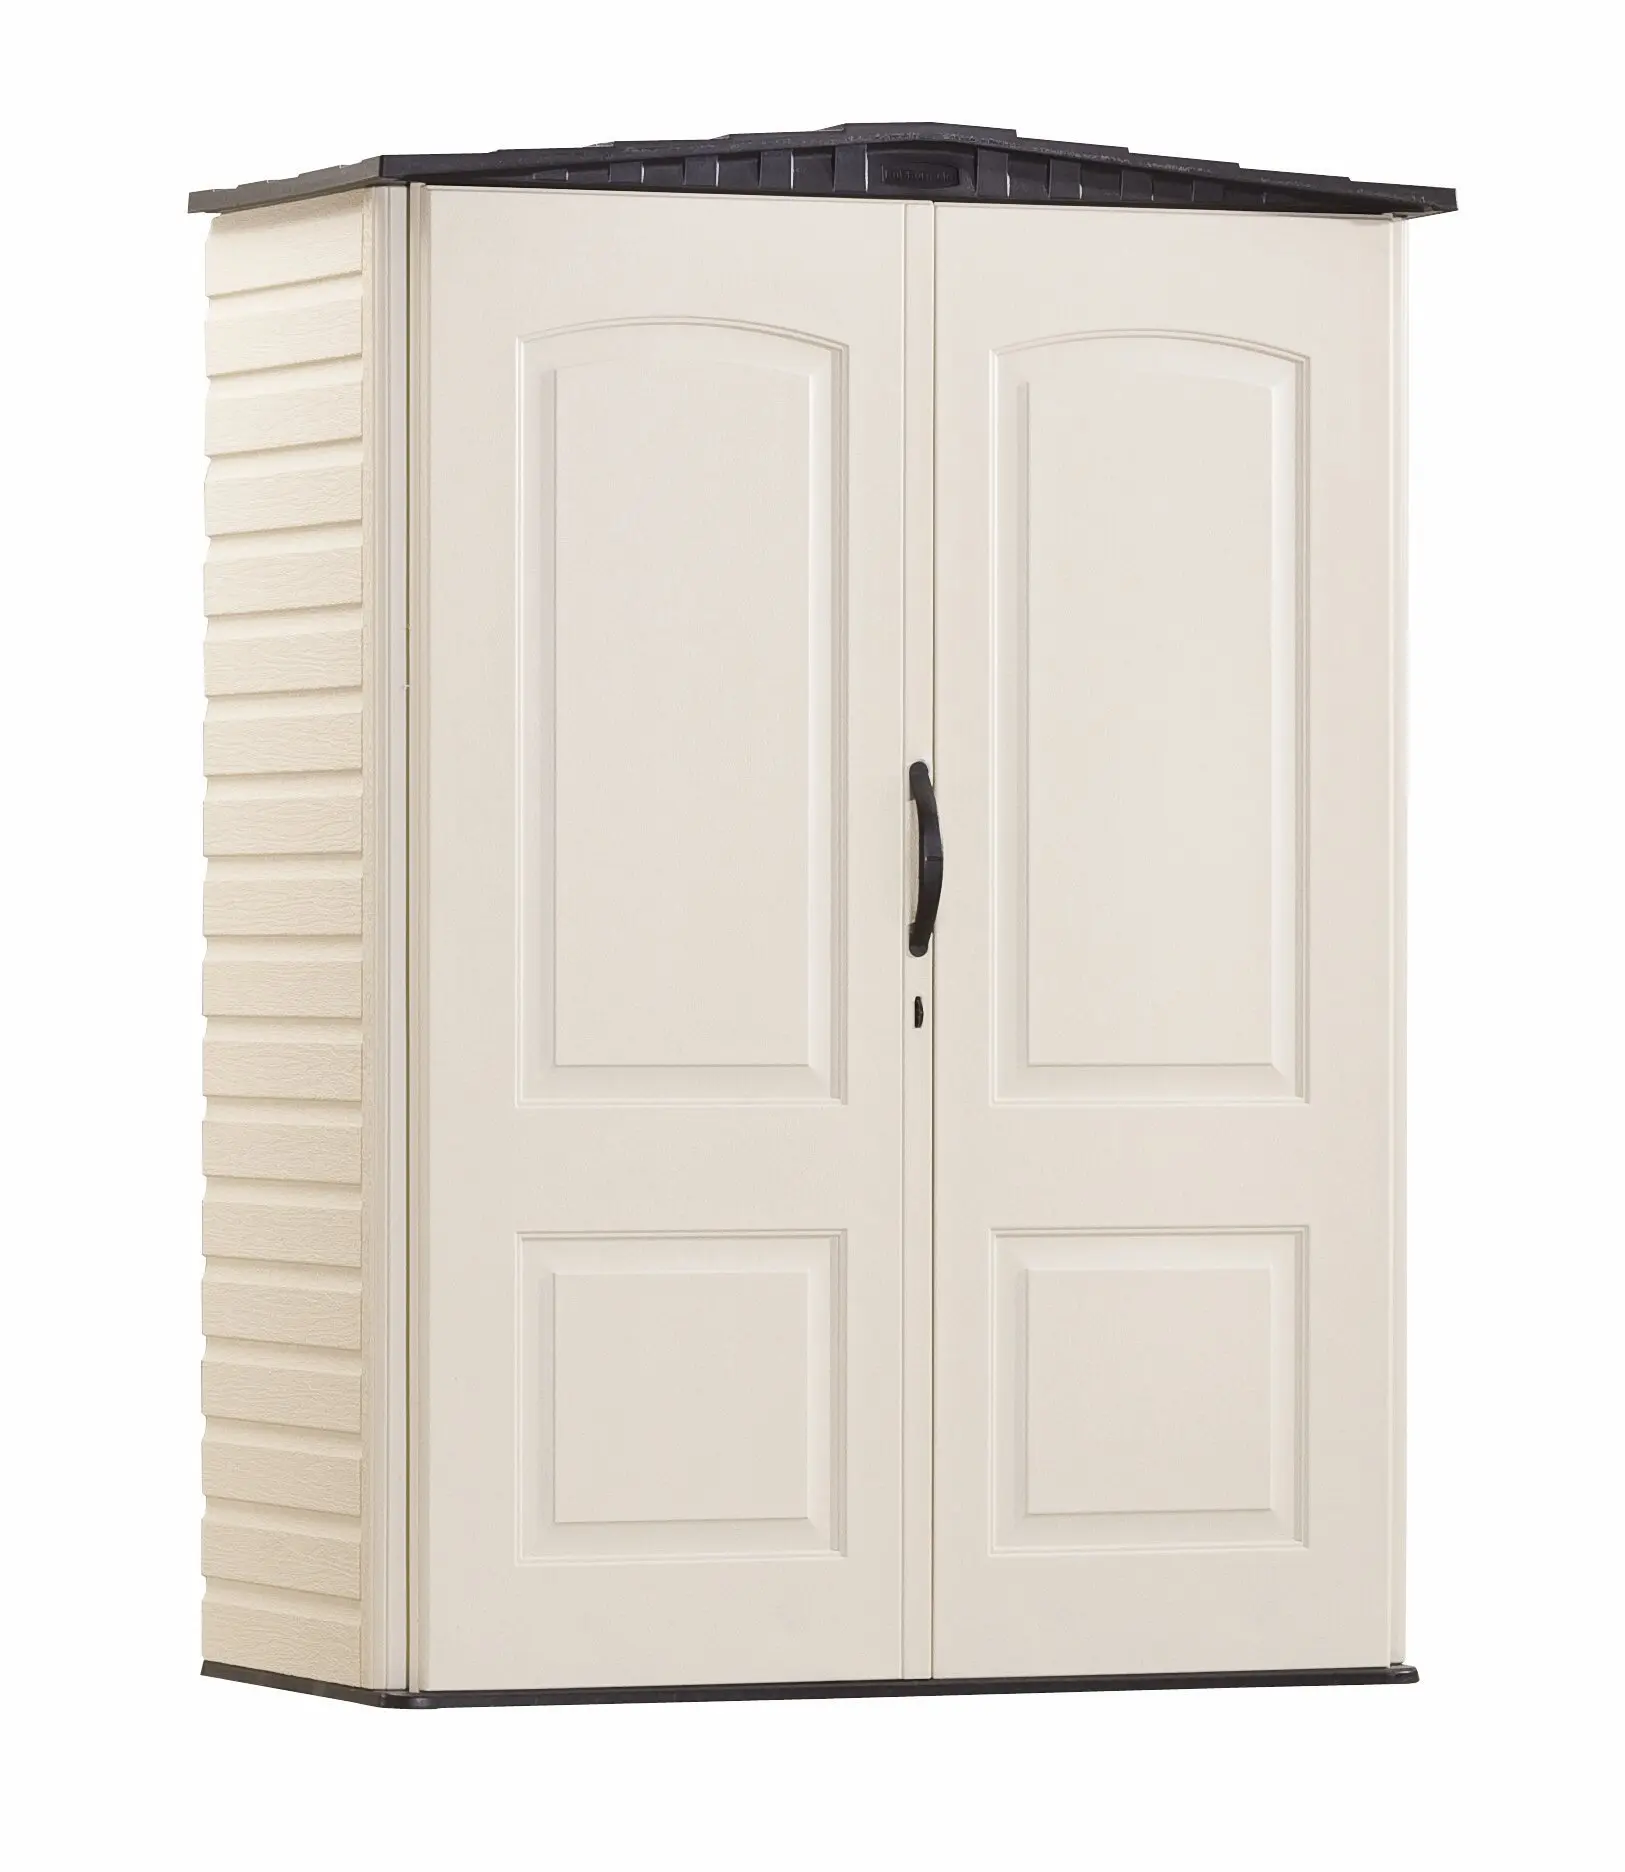 Cheap Rubbermaid Storage Shed Replacement Parts, find ...